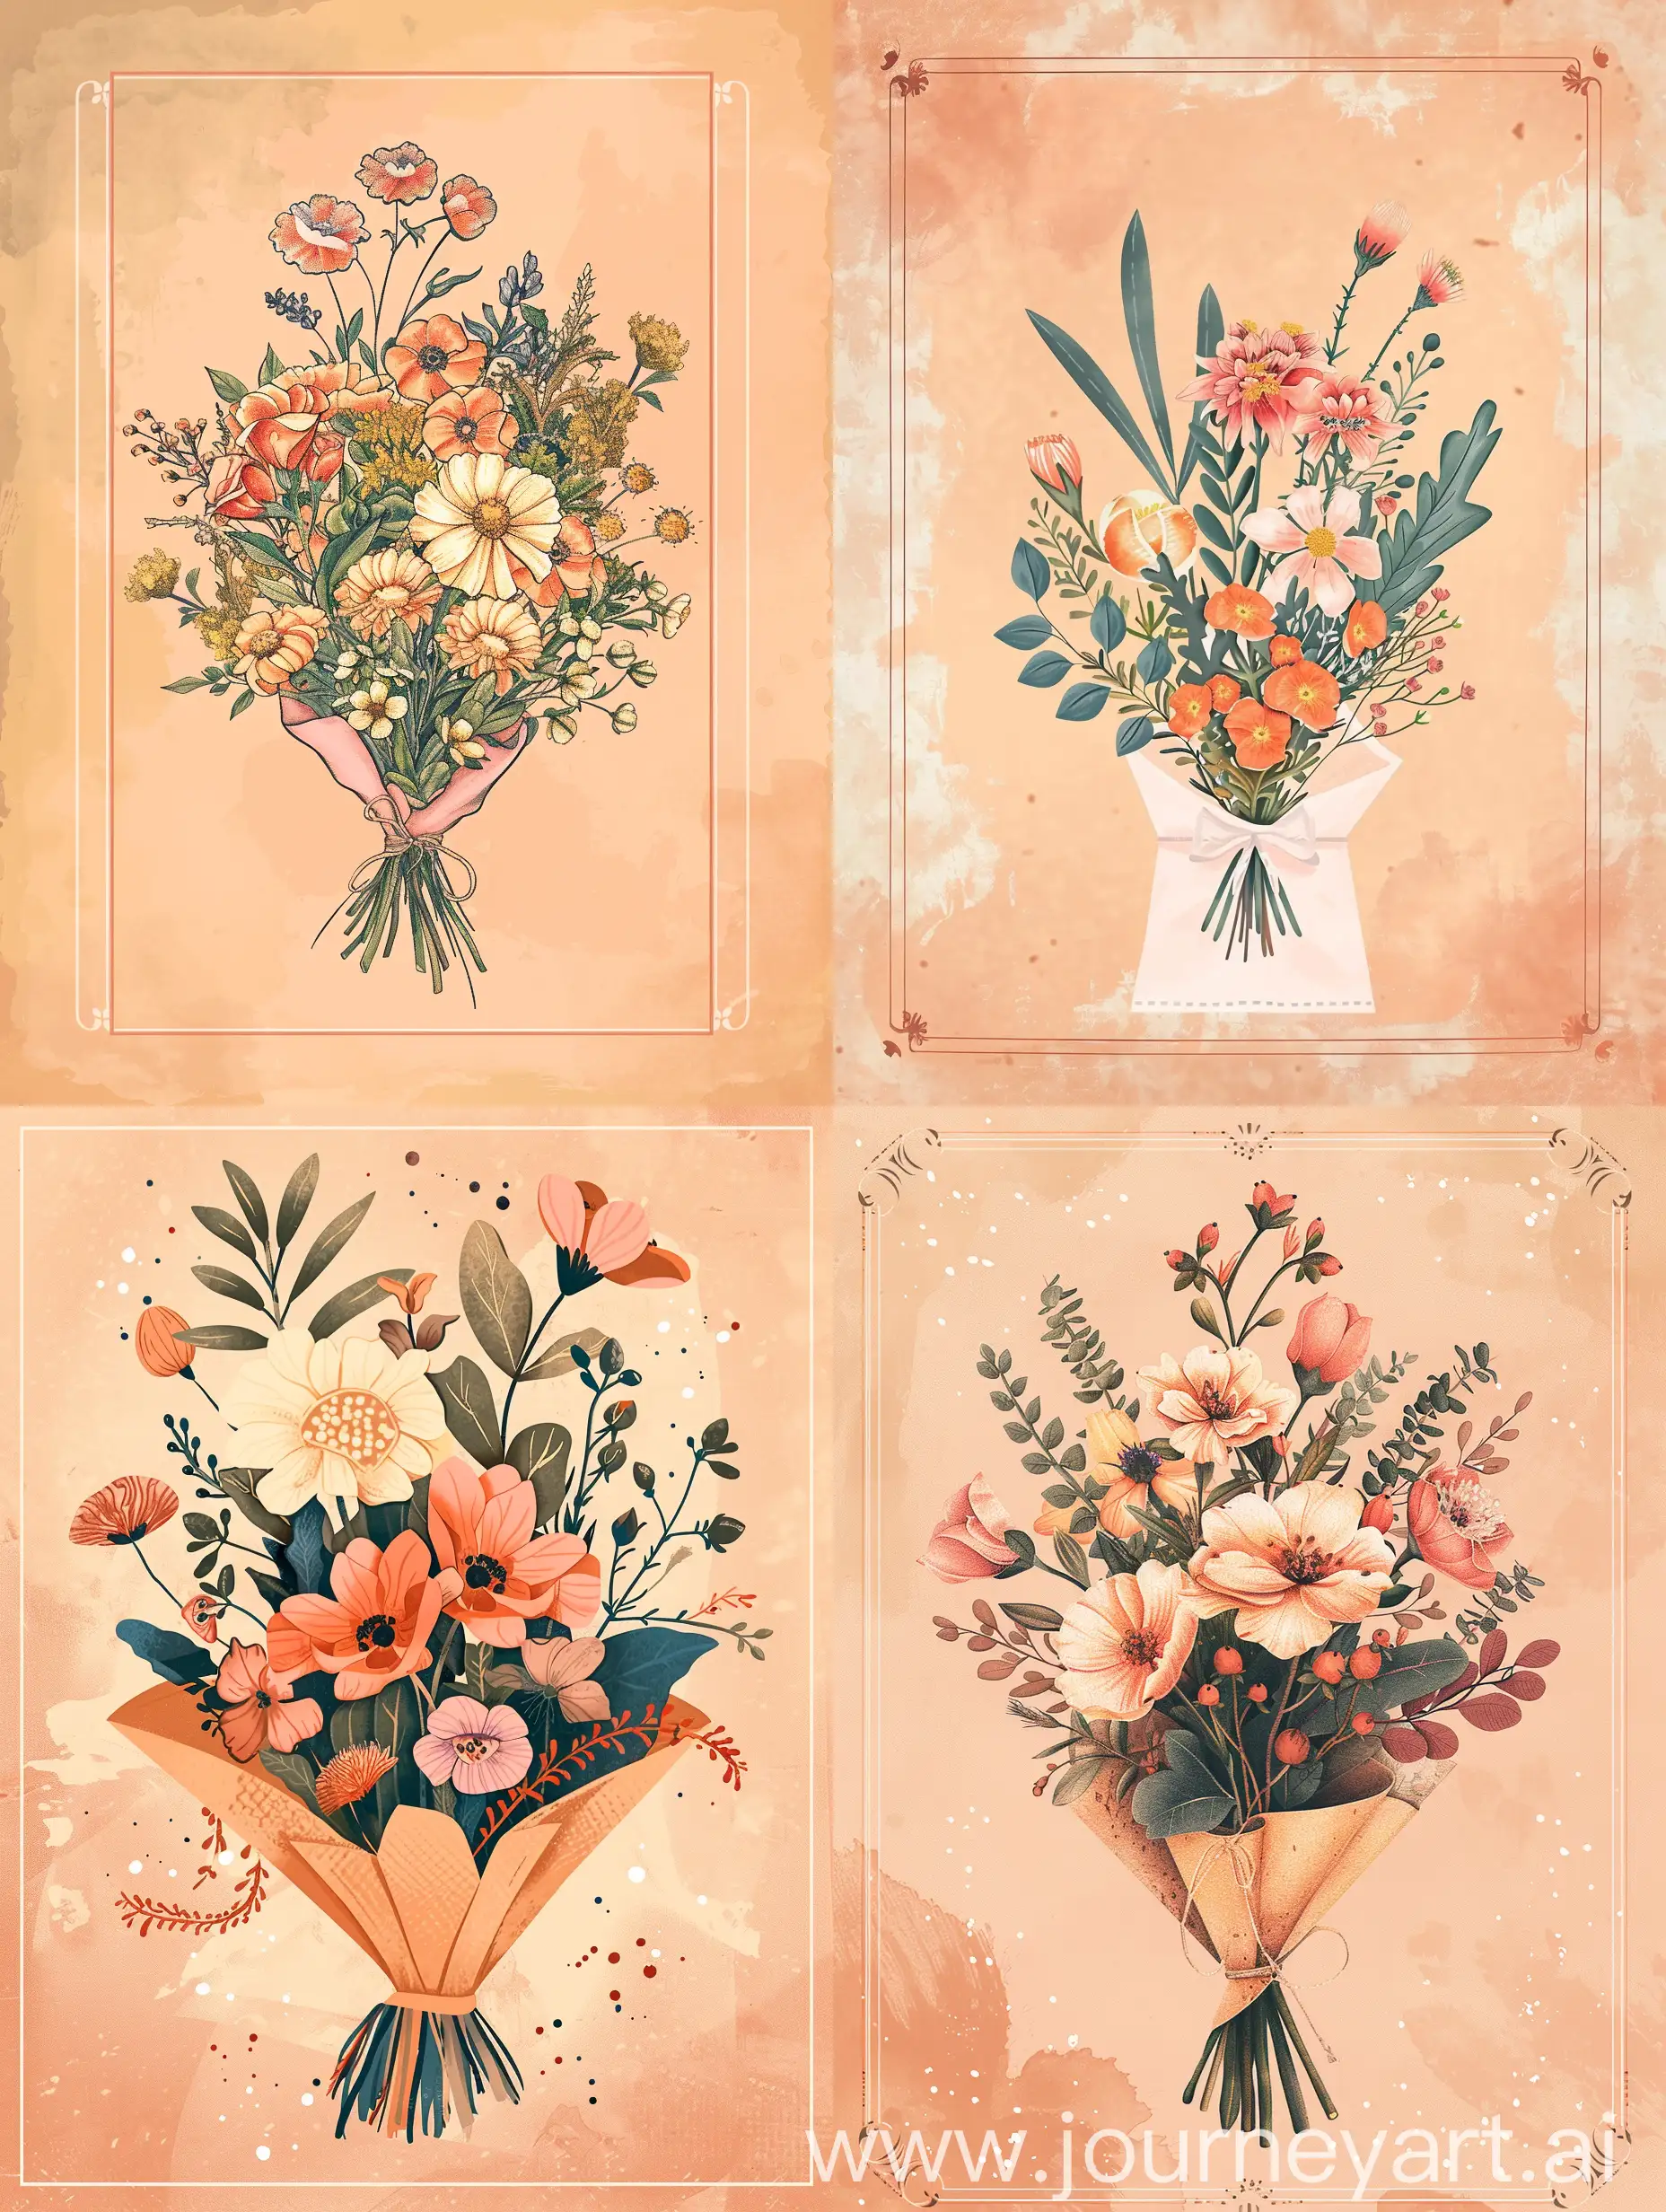 draw on the banner a bouquet of natural flowers in a package, different ornaments, without a frame, peach tone of the background, in the center a dedicated place for text framed by a flower frame, fullhd resolution examples